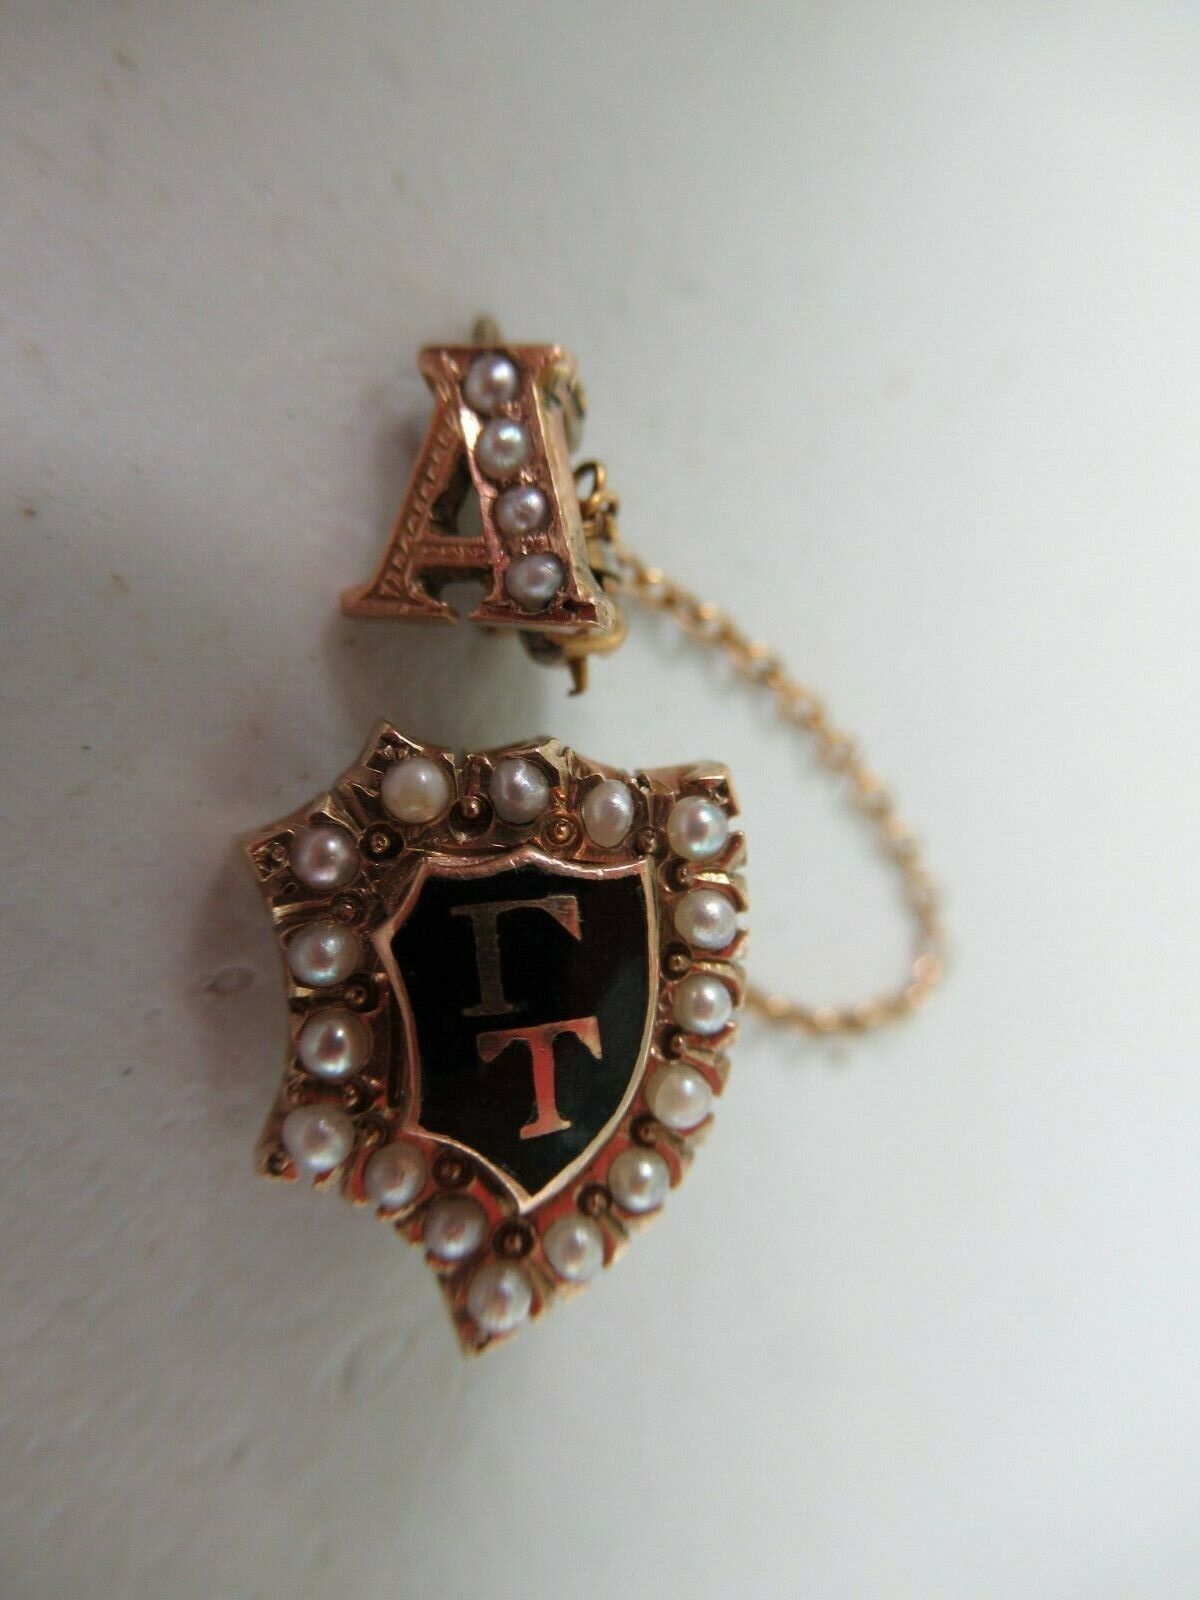 USA FRATERNITY PIN GAMMA TAU. MADE IN GOLD 10K. NAMED. 779